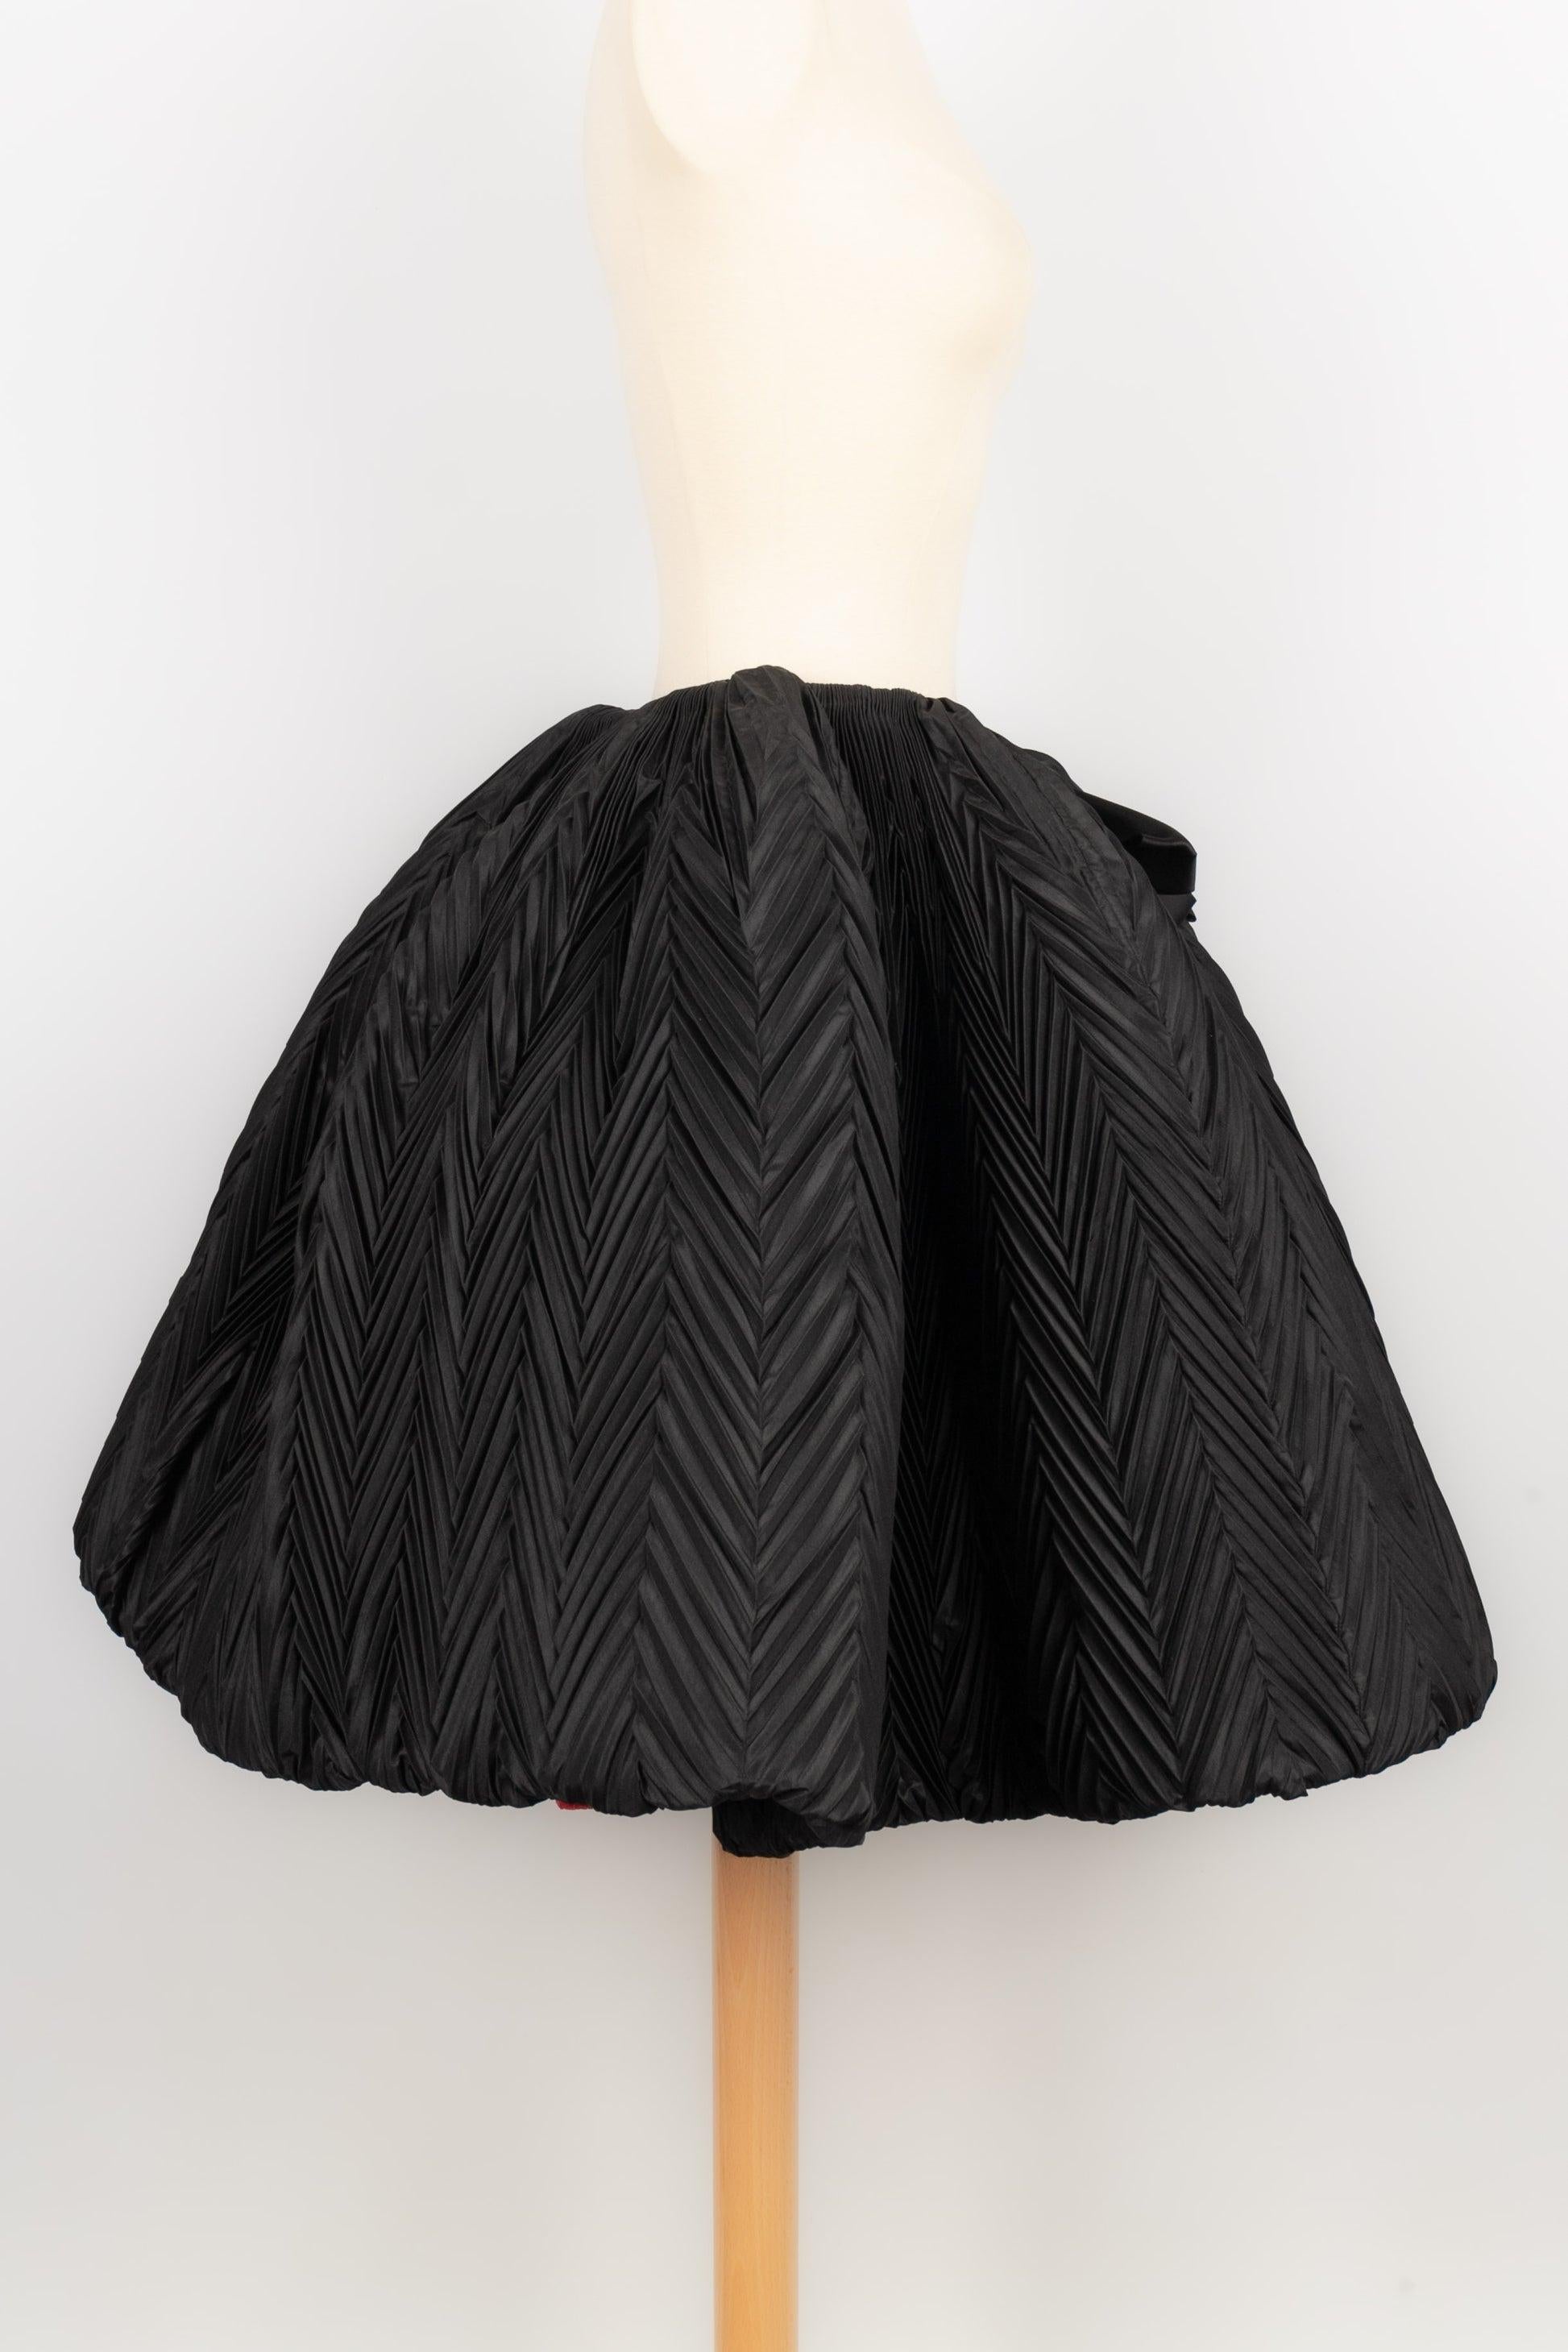 Nina Ricci -Haute Couture circle skirt covered with black taffeta with geometrical pleats and an impressive central bow. No size indicated, it fits a 36FR.

Additional information:
Condition: Very good condition
Dimensions: Waist: 30 cm - Length: 57